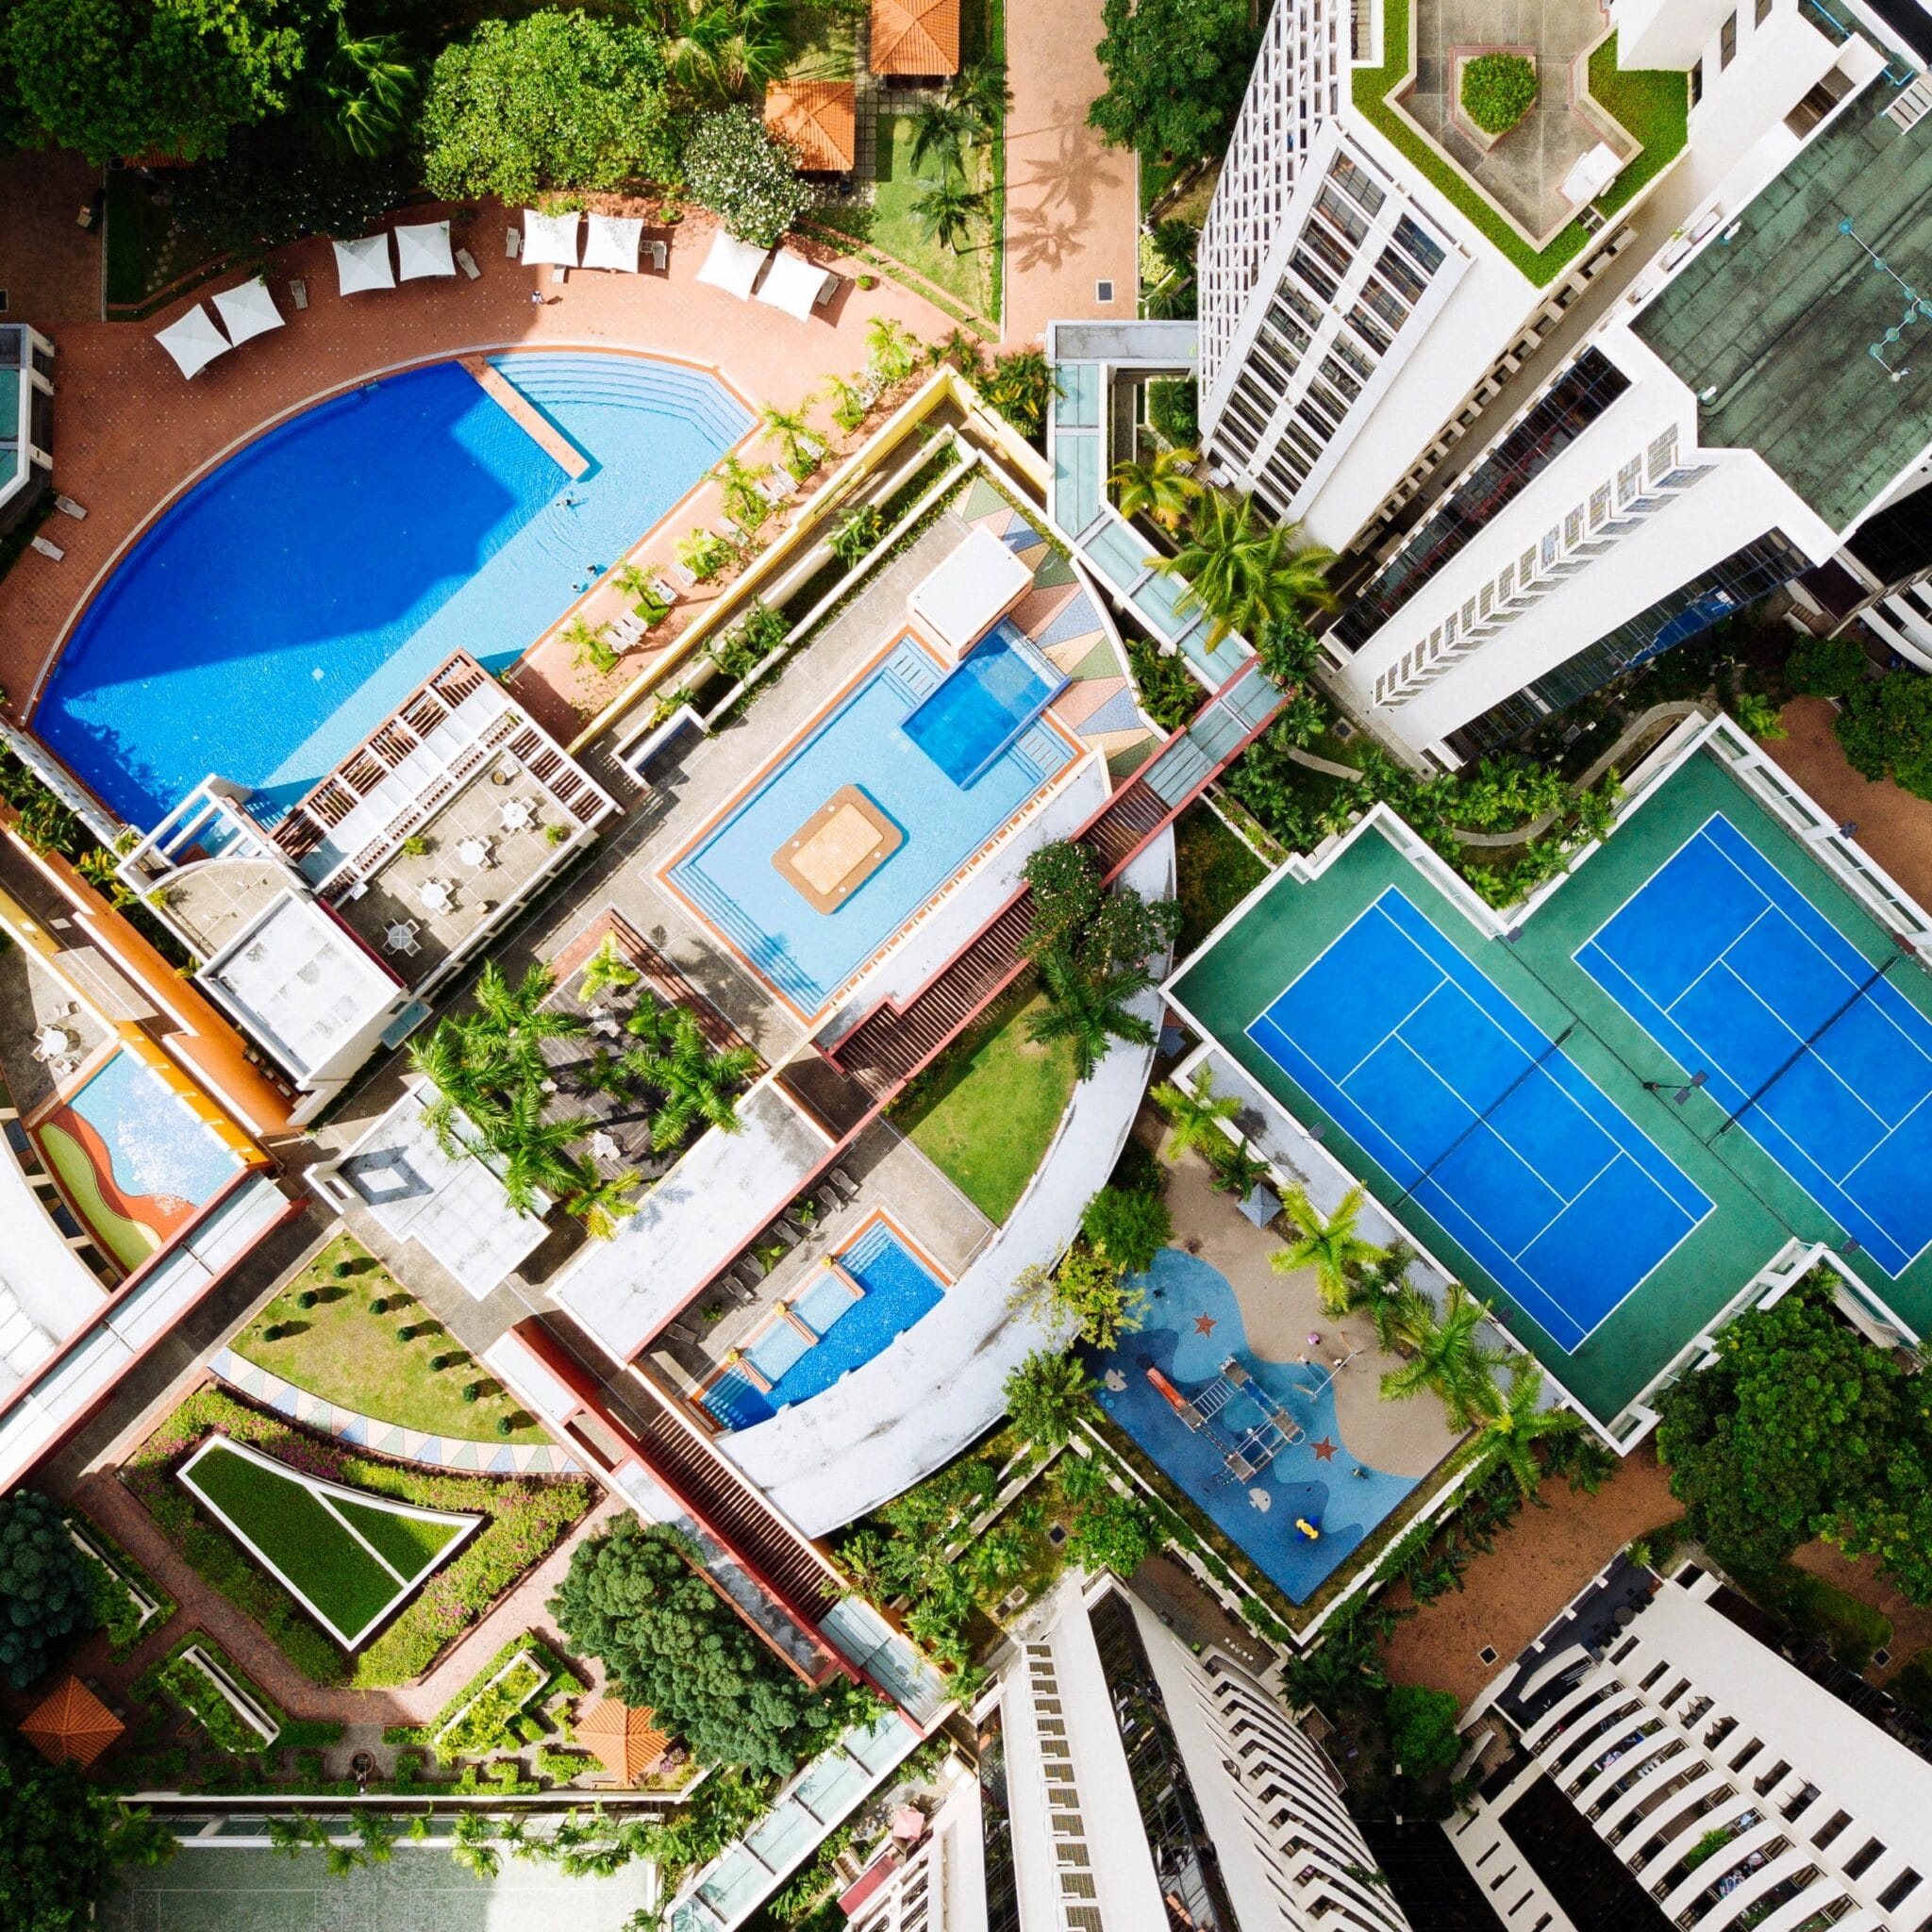 Birds-eye view of common spaces in an apartment or condo complex, featuring multiple pools, tennis courts, and outdoor lounging areas. The complex is set in a city with tall, modern buildings.